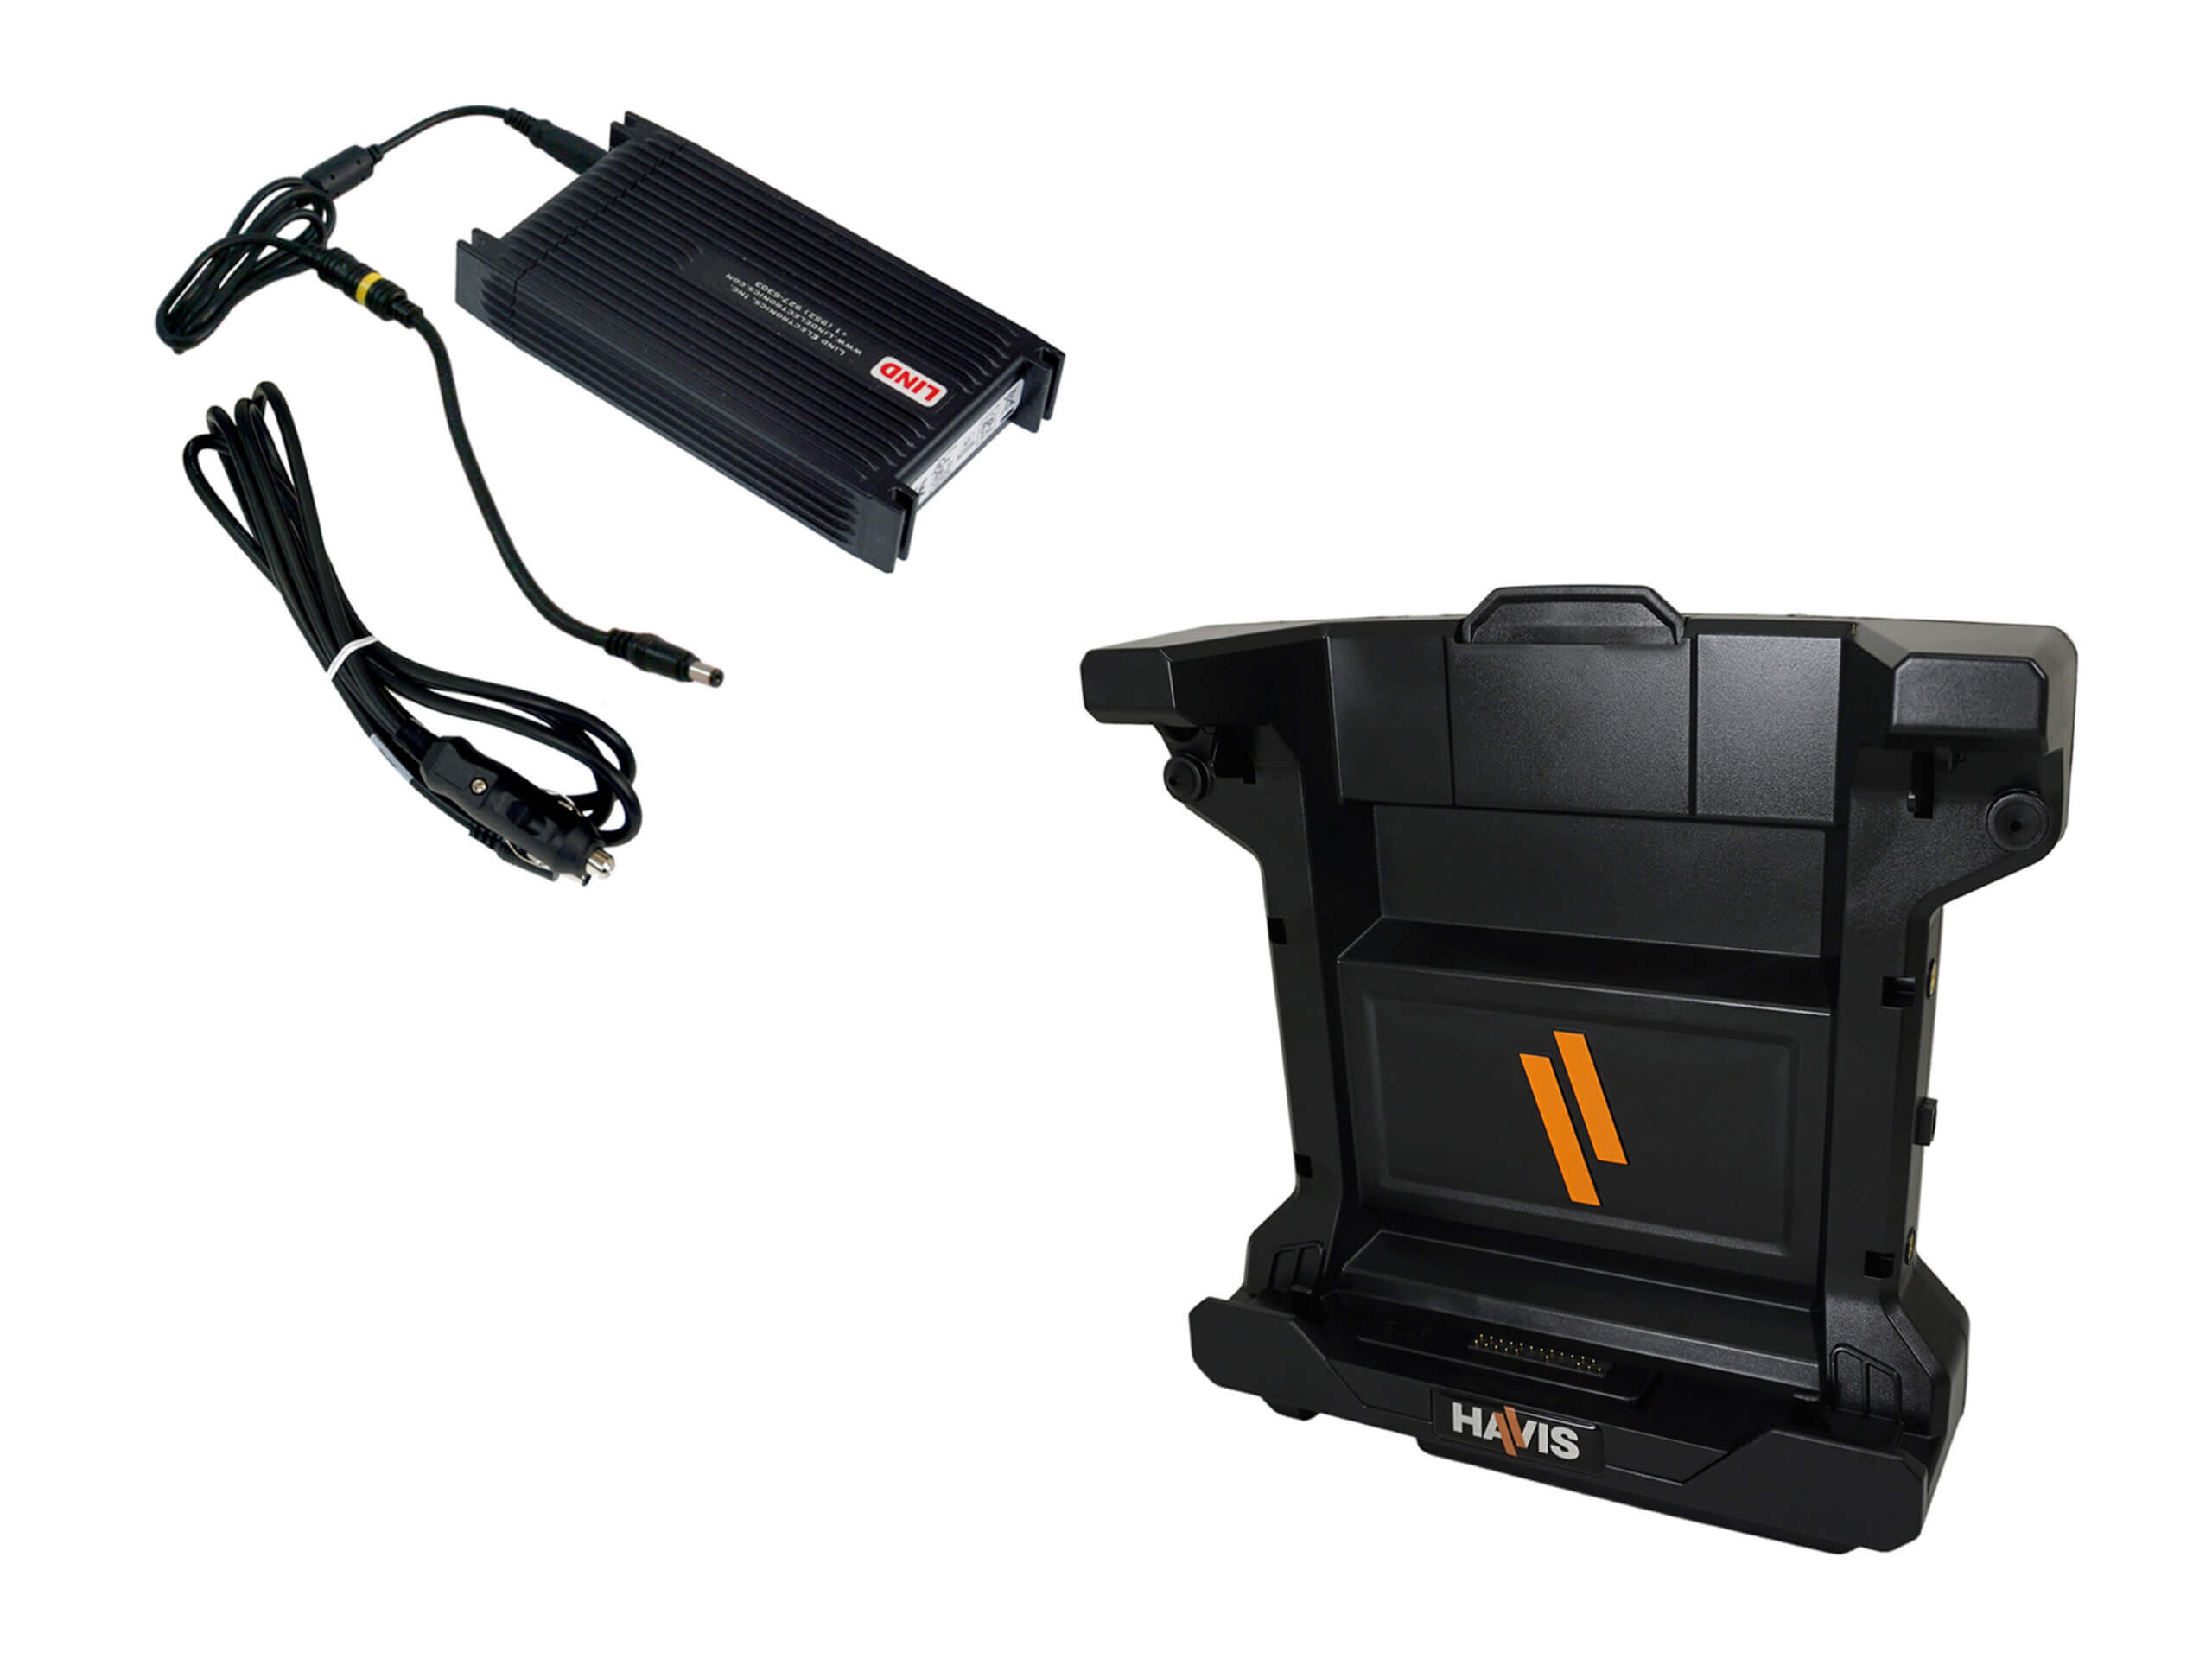 Docking Station with Advanced Electronics and External Power Supply for Dell Latitude Rugged 12″ Tablets (7220, 7212)